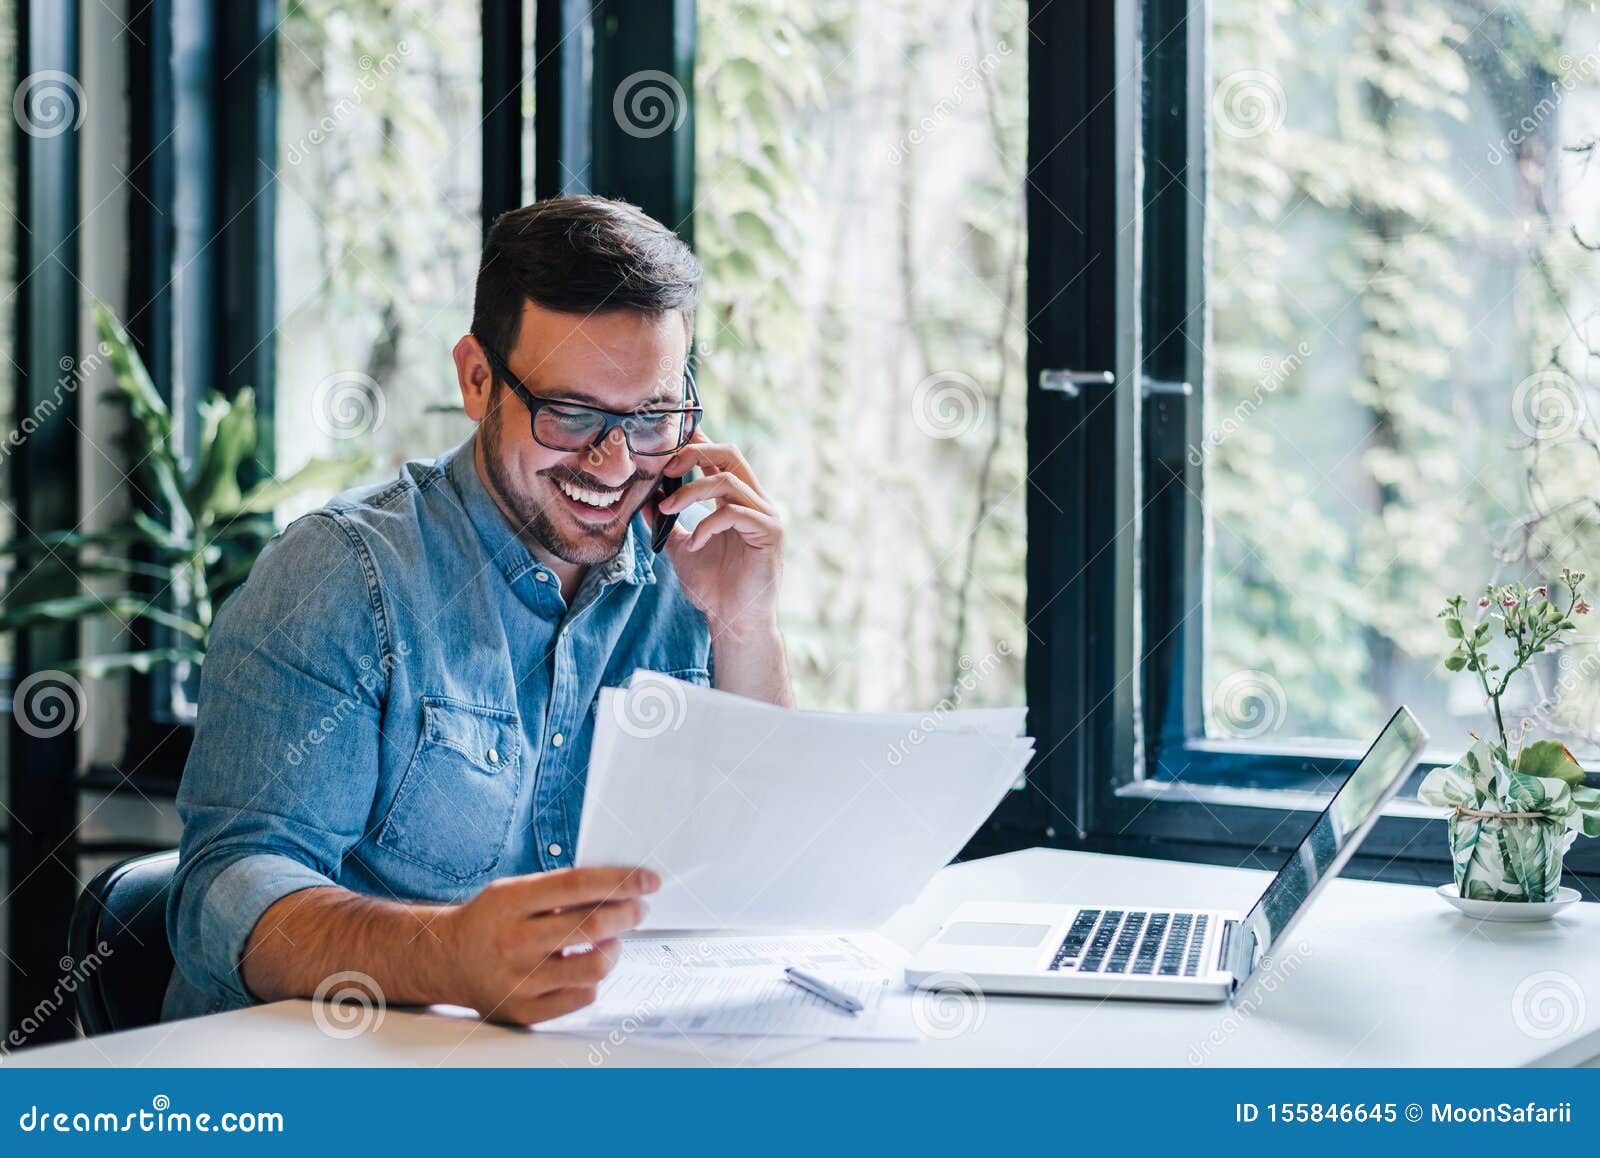 portrait of young smiling cheerful entrepreneur in casual office making phone call while working with charts and graphs looking at